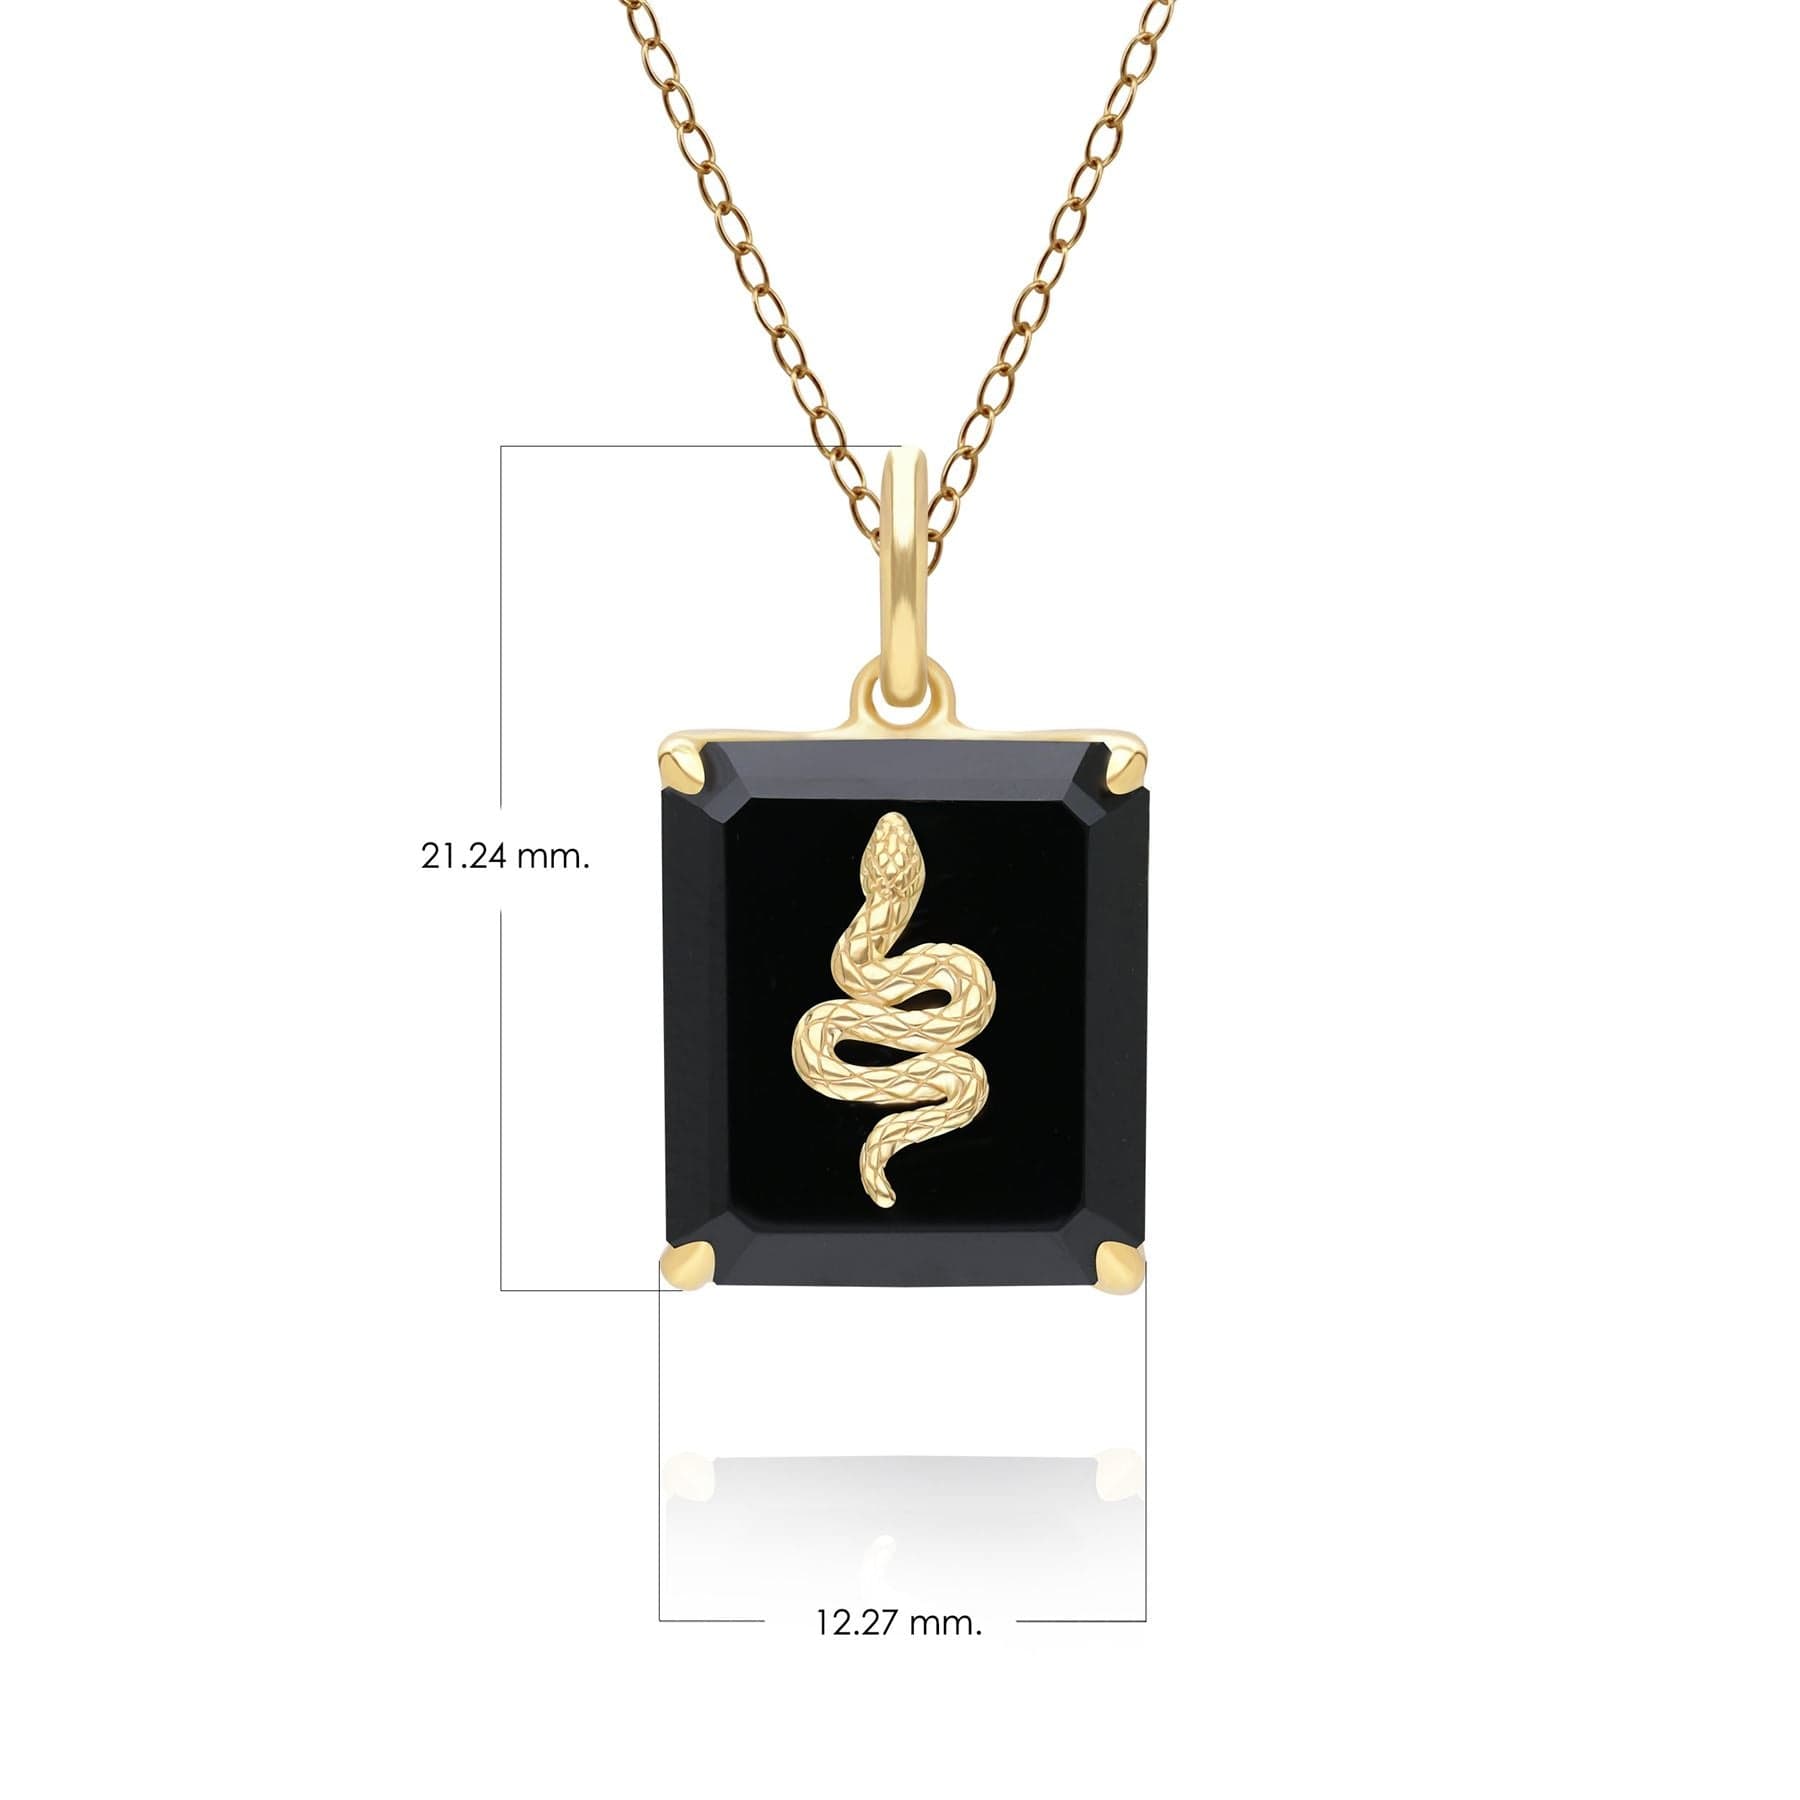 Grand Deco Black Onyx Snake Pendant in Gold Plated Sterling Silver - Gemondo